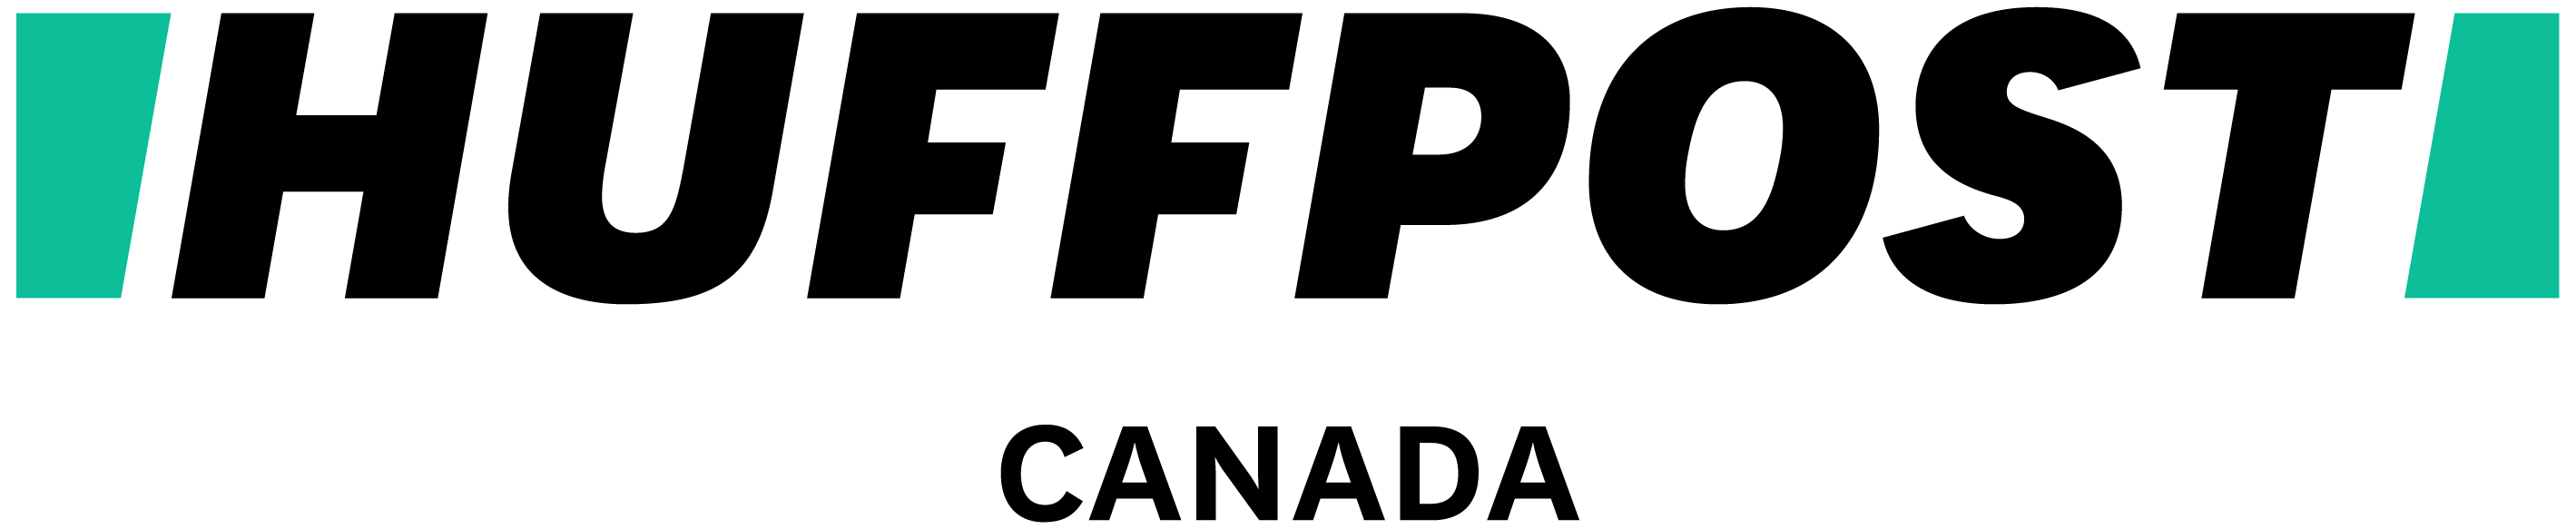 HuffPost Style Logo - Database tracks consultation on Trans Mountain pipeline proposal